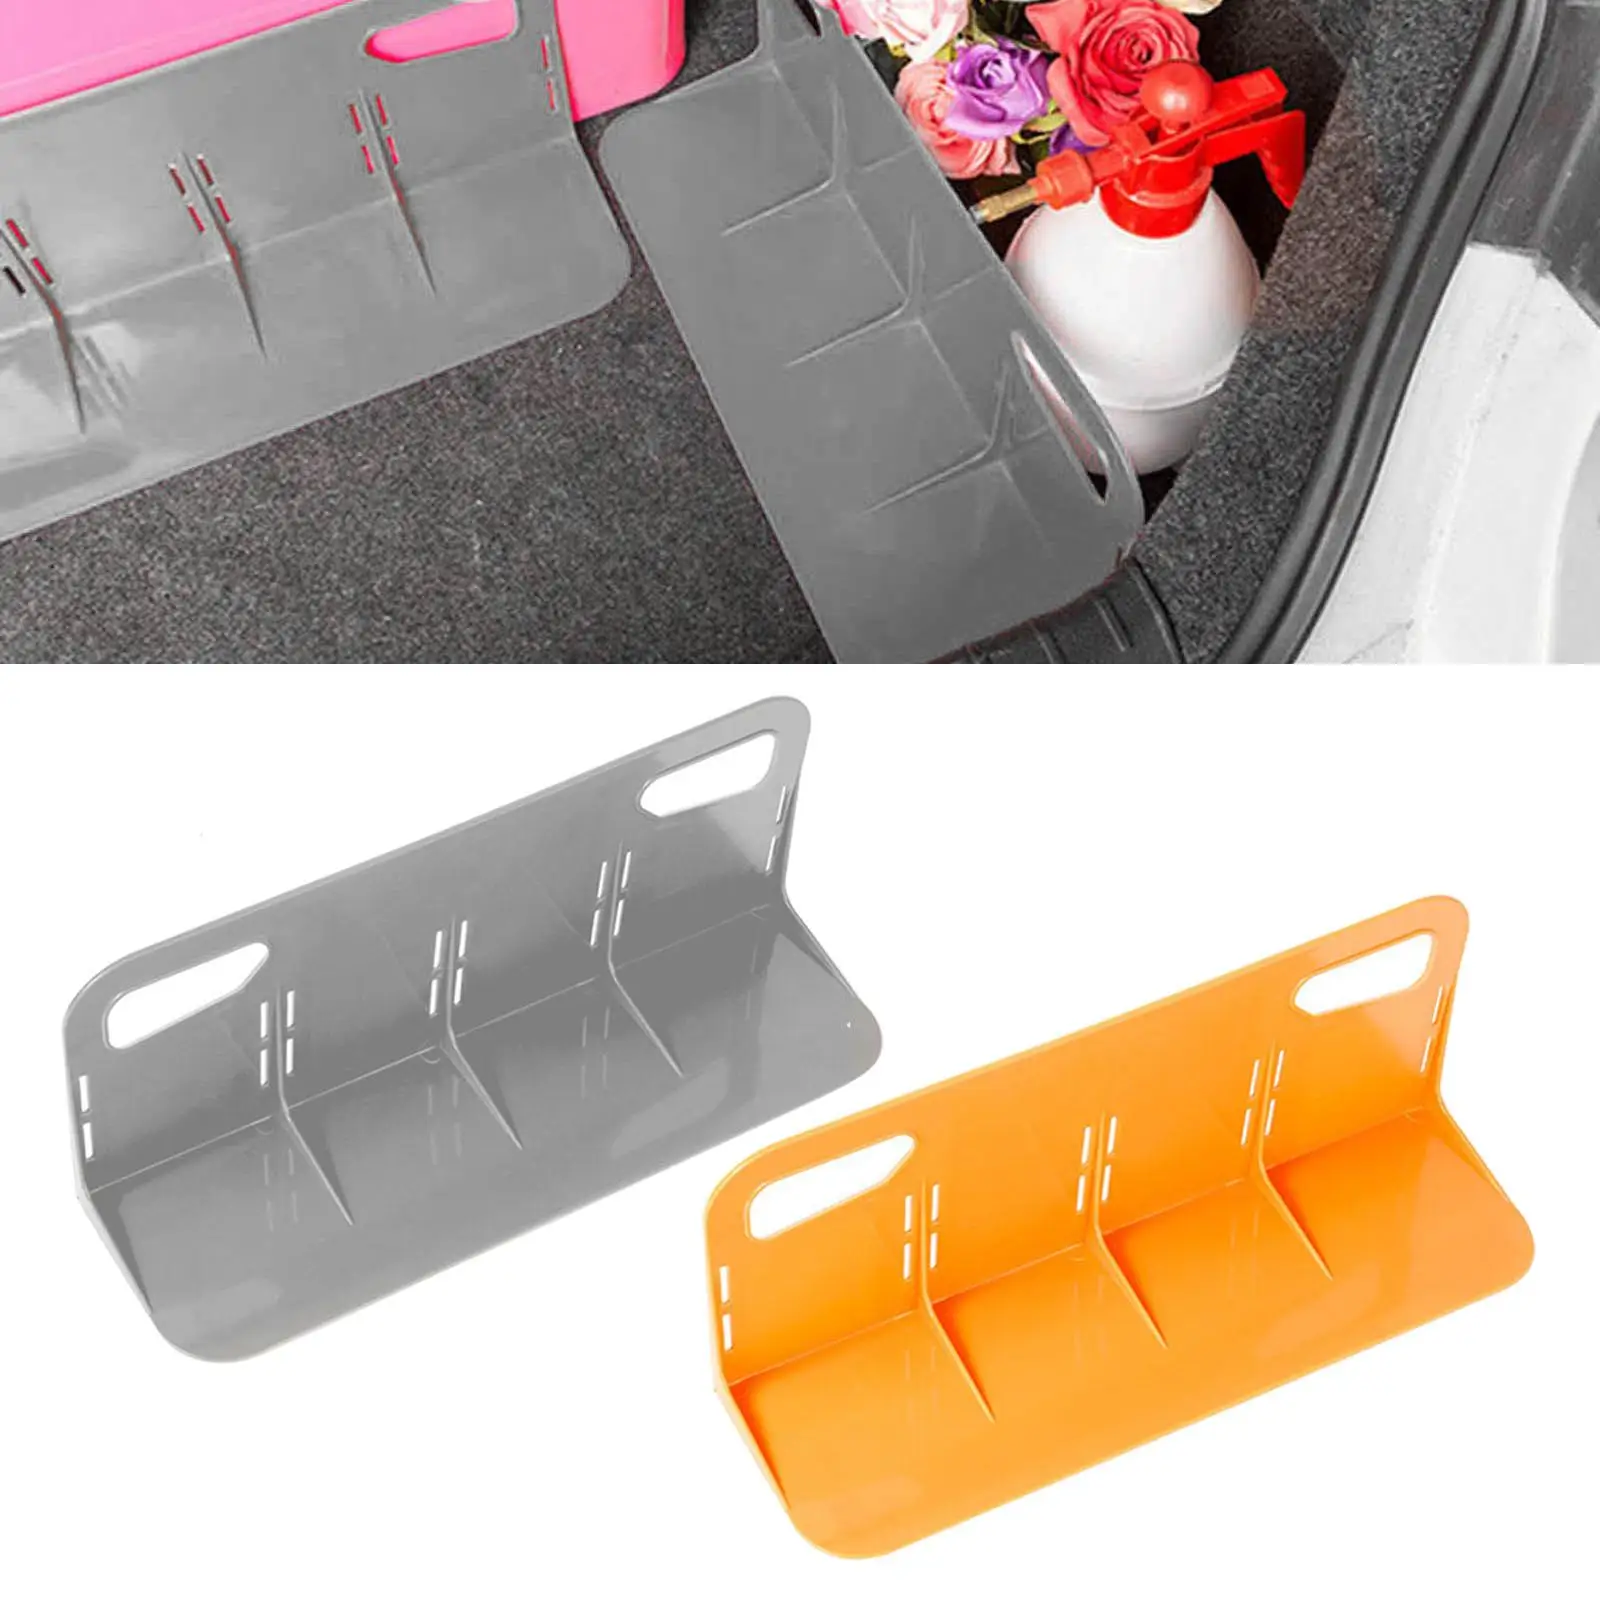 Cr Bck Trunk Fixed Rck Nti Slip L  Fixed Rck Holder Multifunction PP Fixed  Fixed  Rck for for Cr Storge